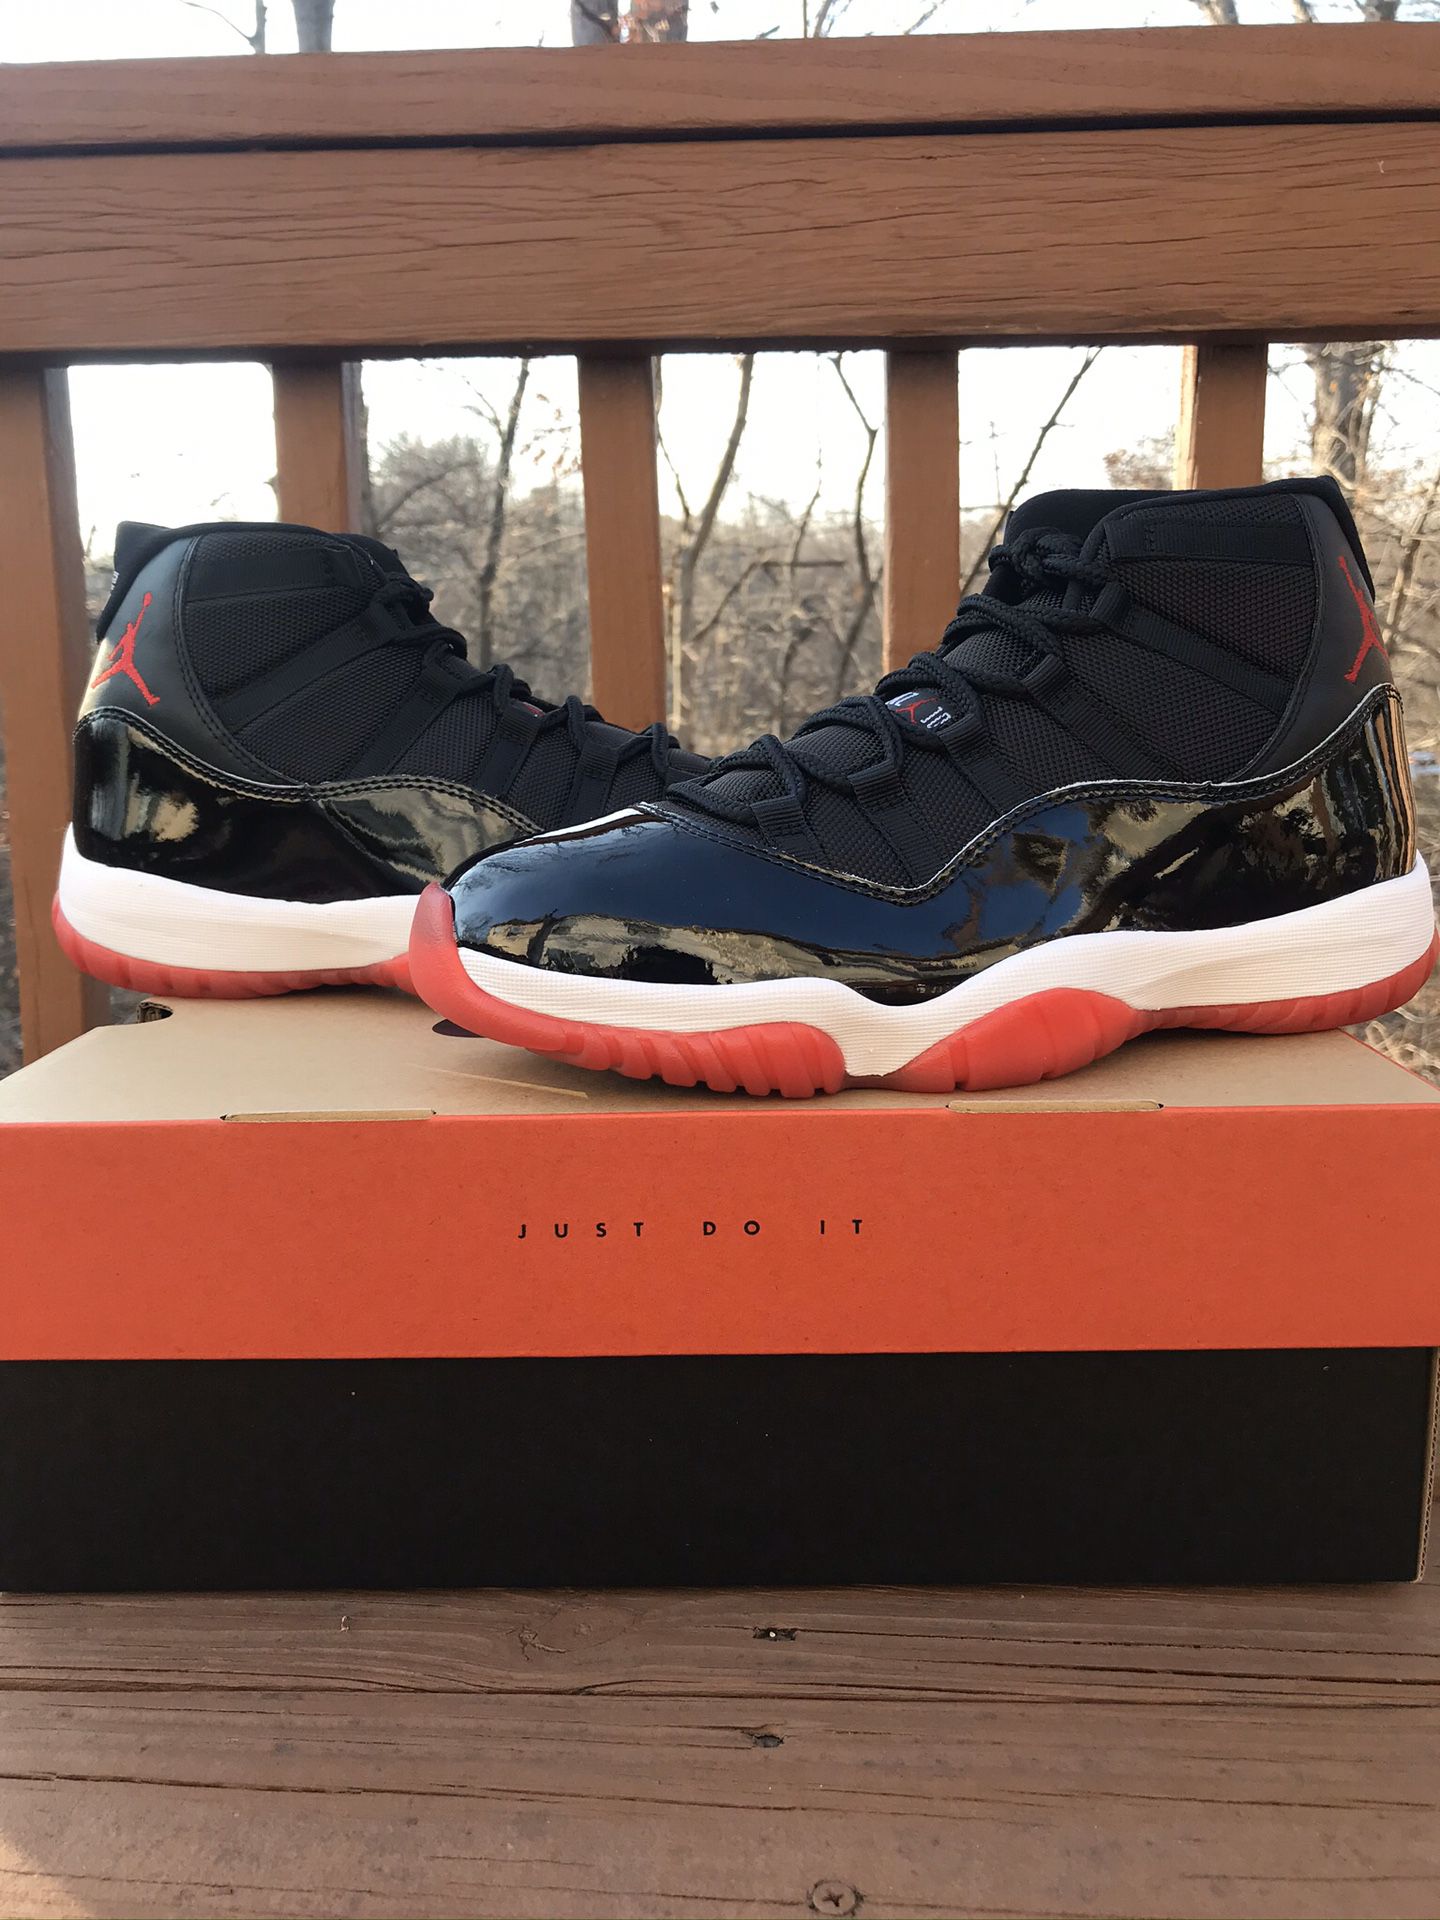 Bred 11 size (10) 100% authentic